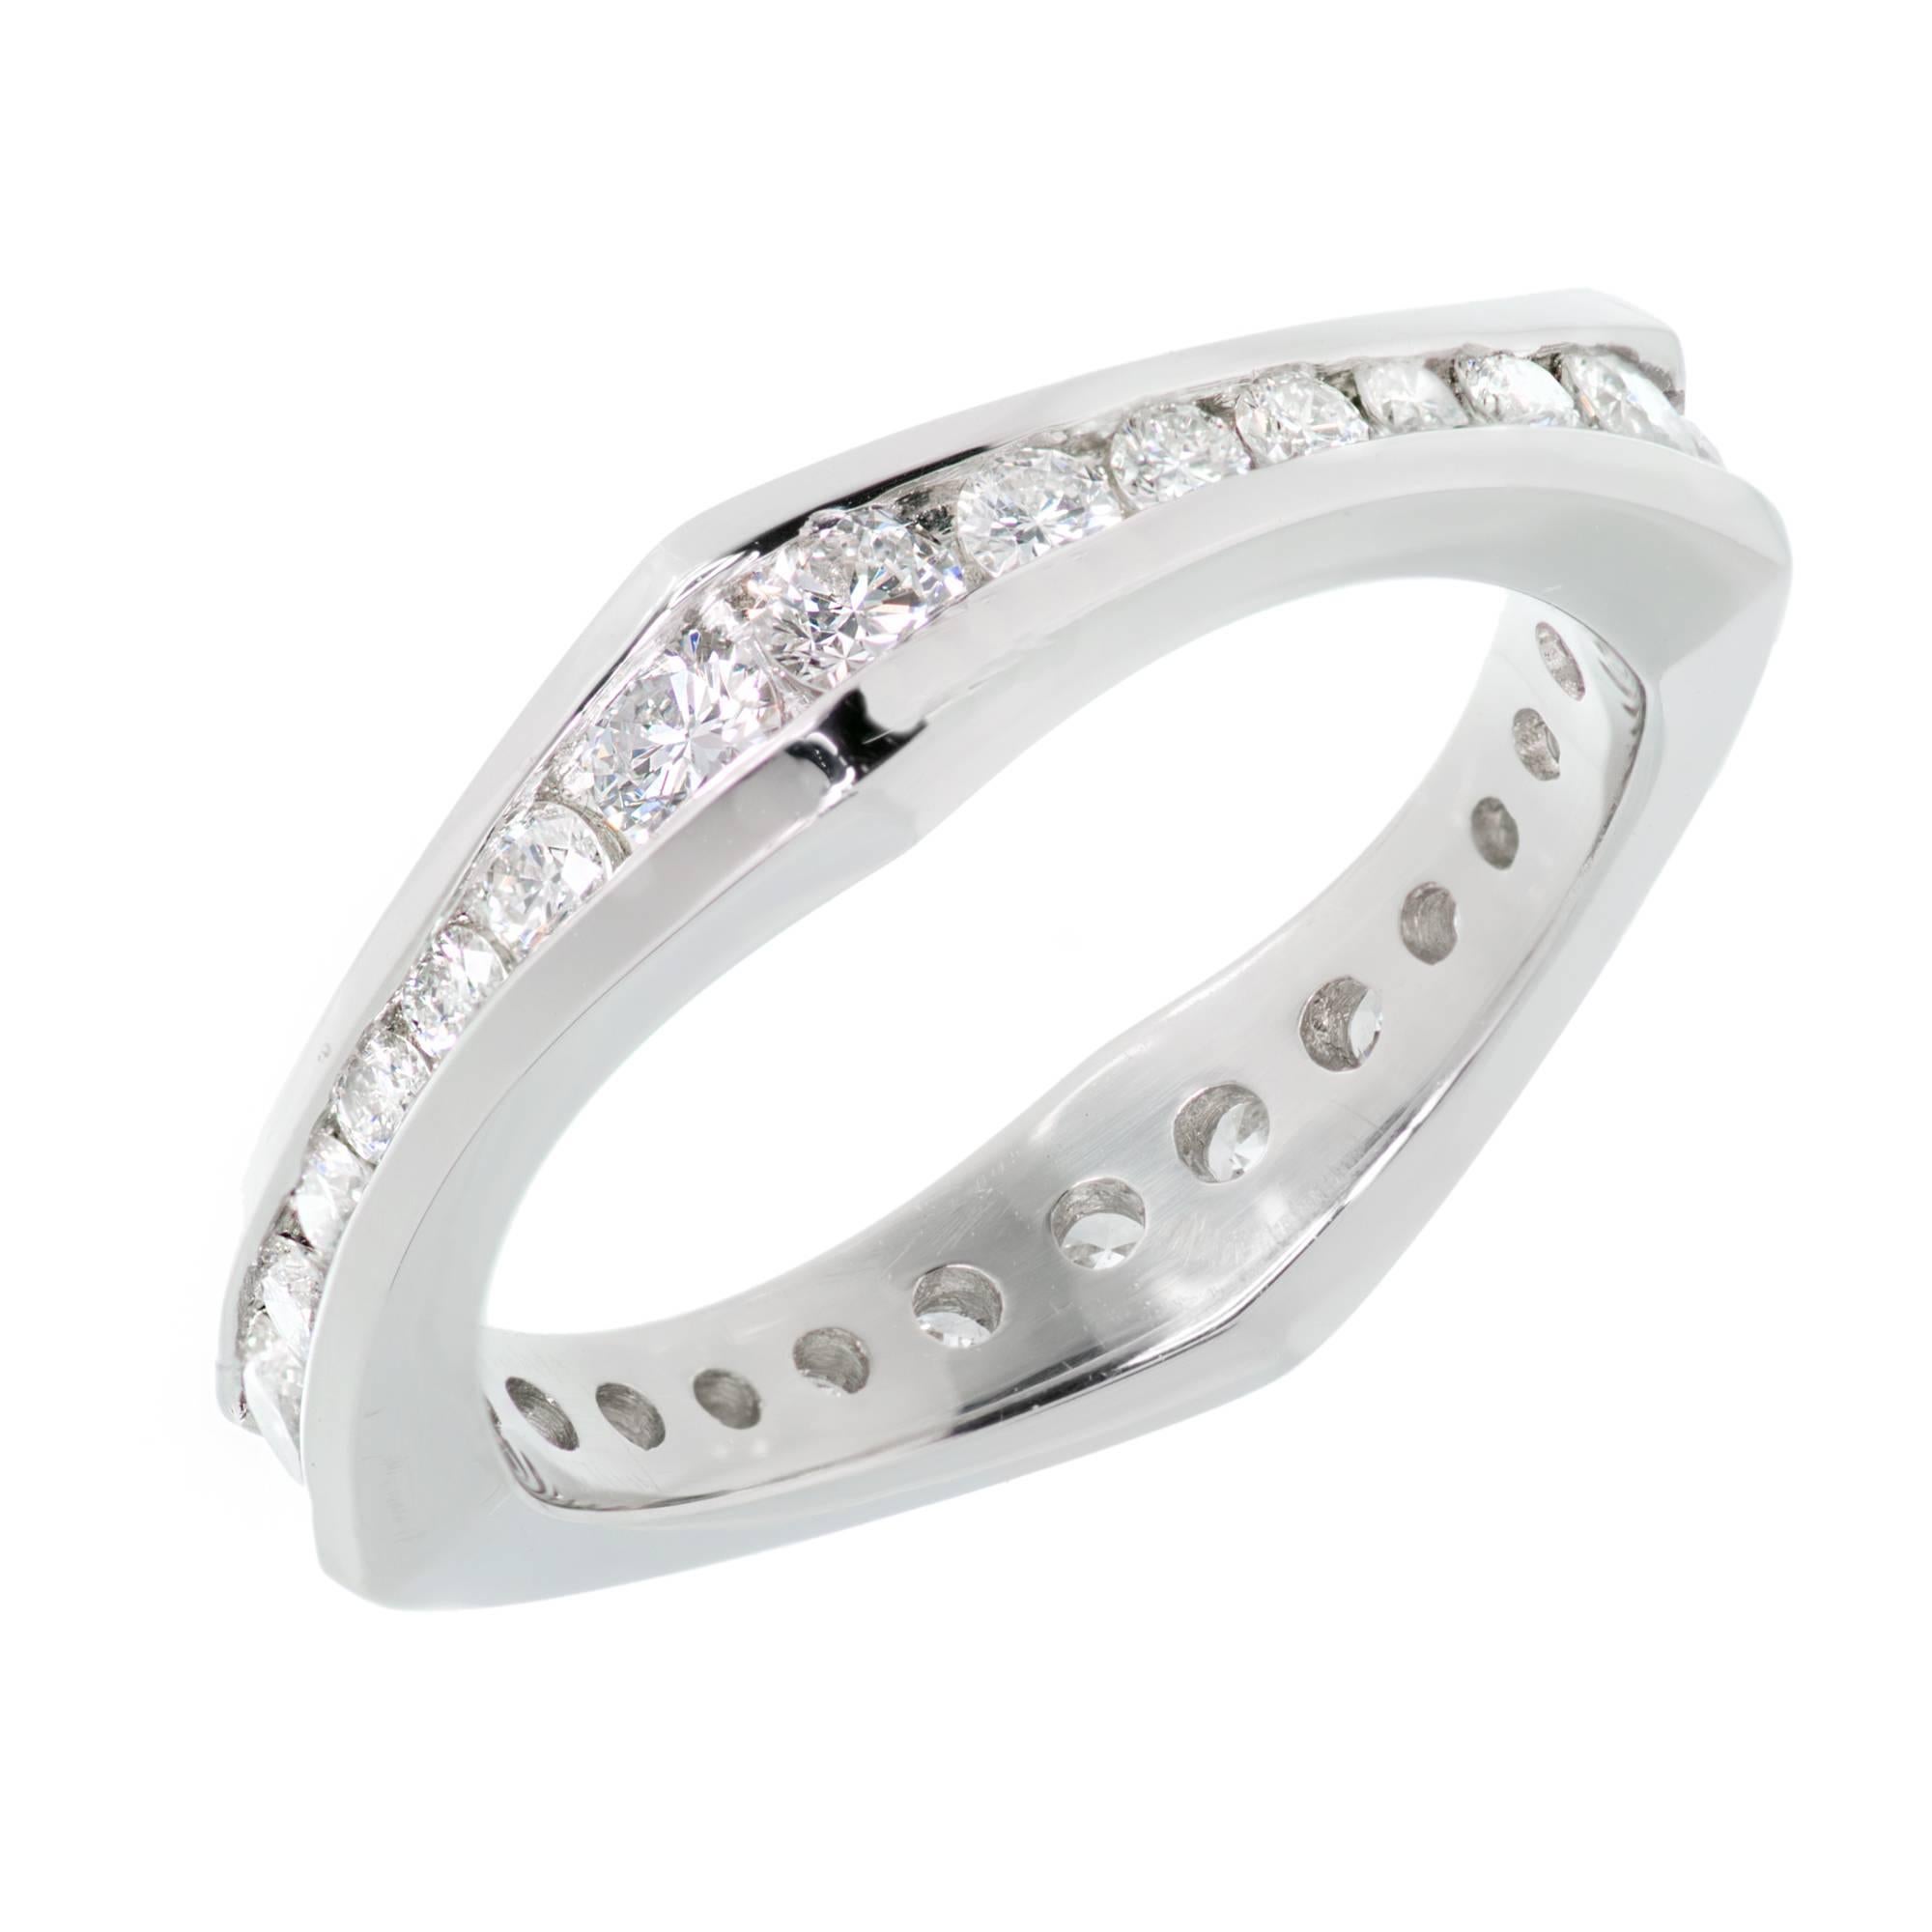 Peter Suchy custom-made European style square shape Eternity wedding band designed with wider and narrower sections to fit flush next to hard to fit engagement rings. Can be custom made in any finger size or metal.

28 round full cut diamonds,